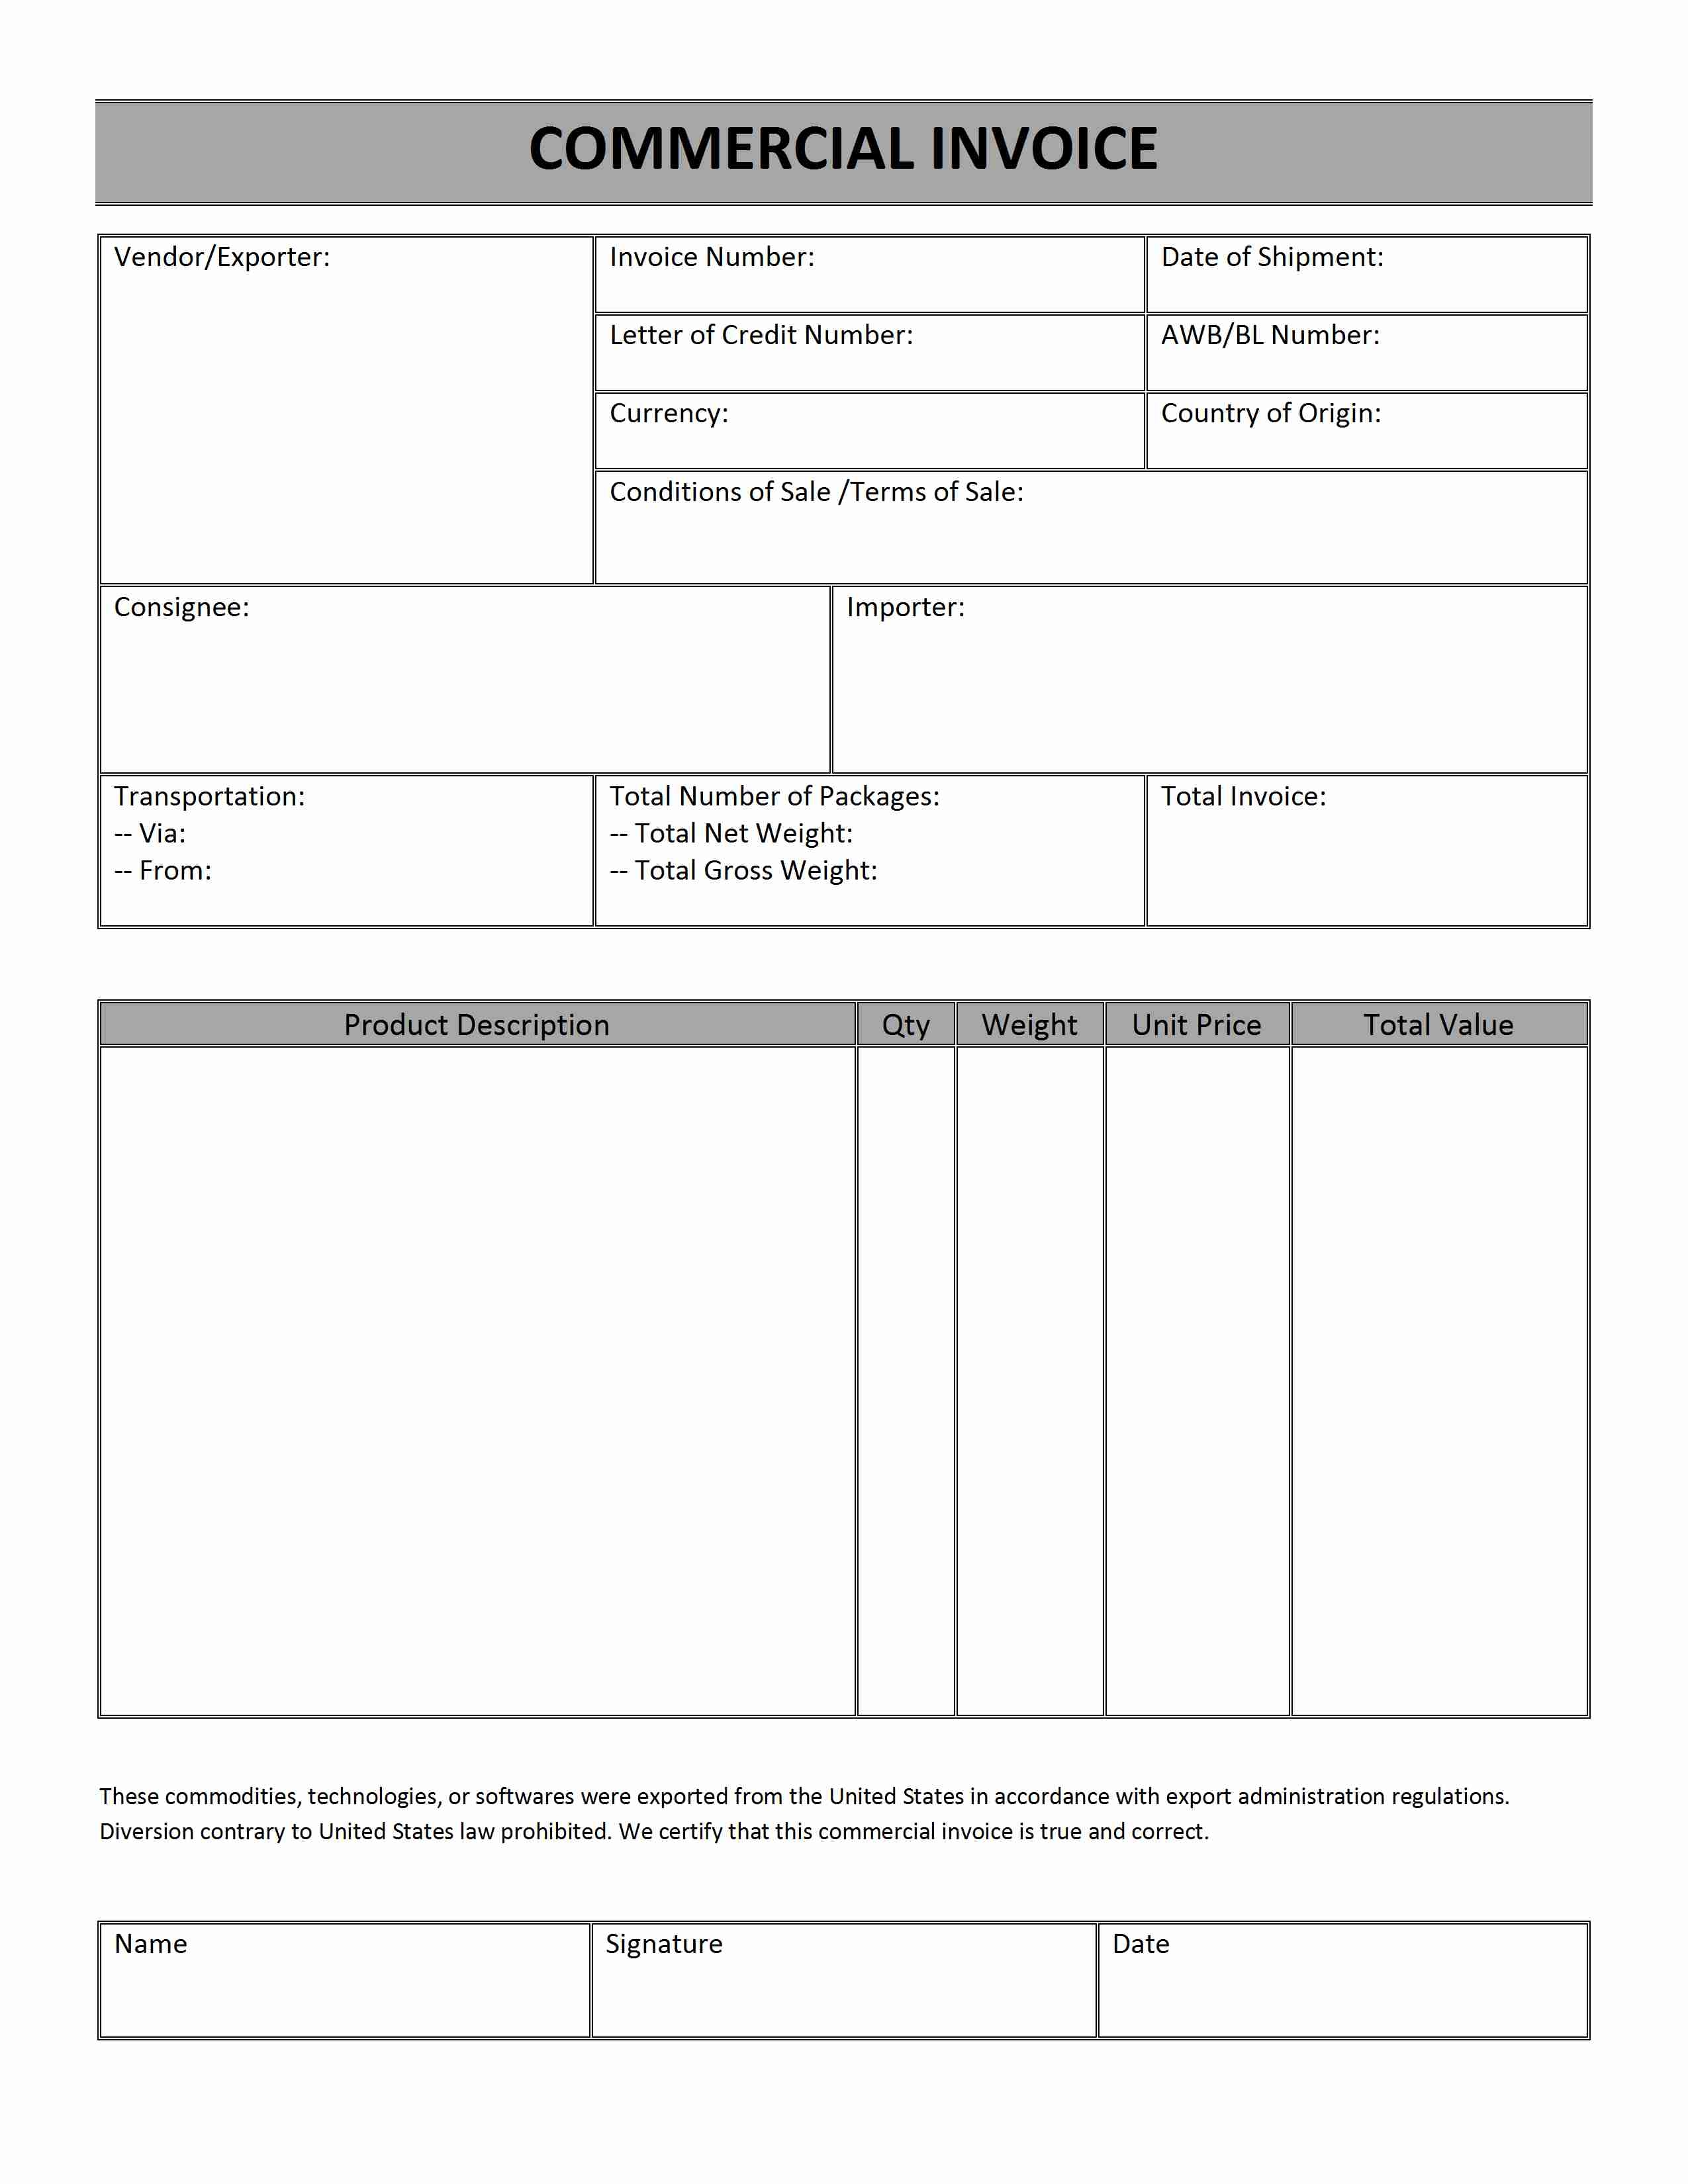 commercial invoice commercial invoice template fee download pdf invoice template free pdf